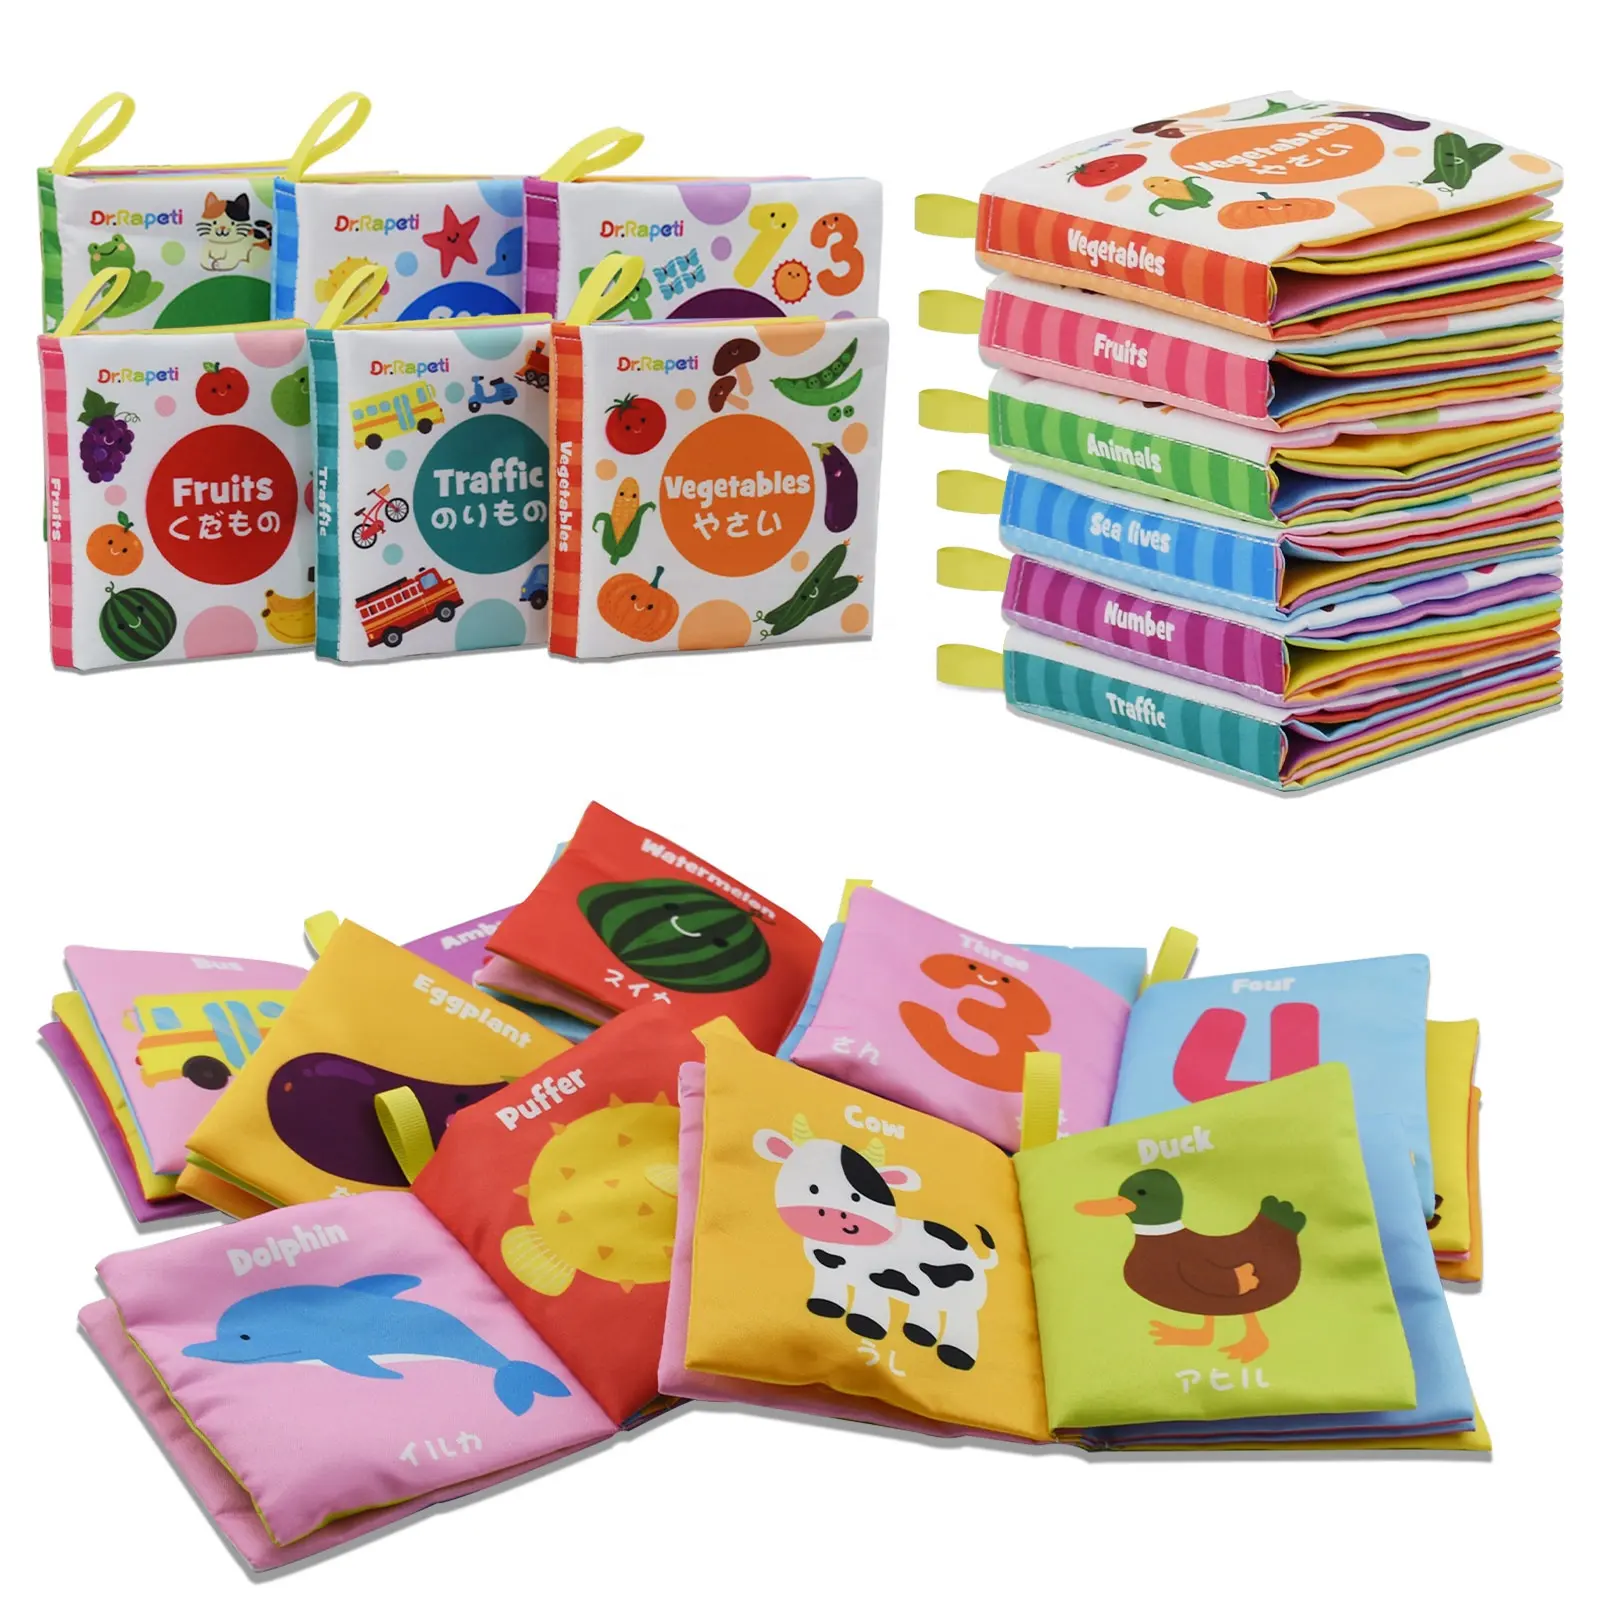 Rustle Sound Soft Cloth Reading Educational Baby Books 6 themes Colorful Soft Sensory Toys for 0+ Ages Kids